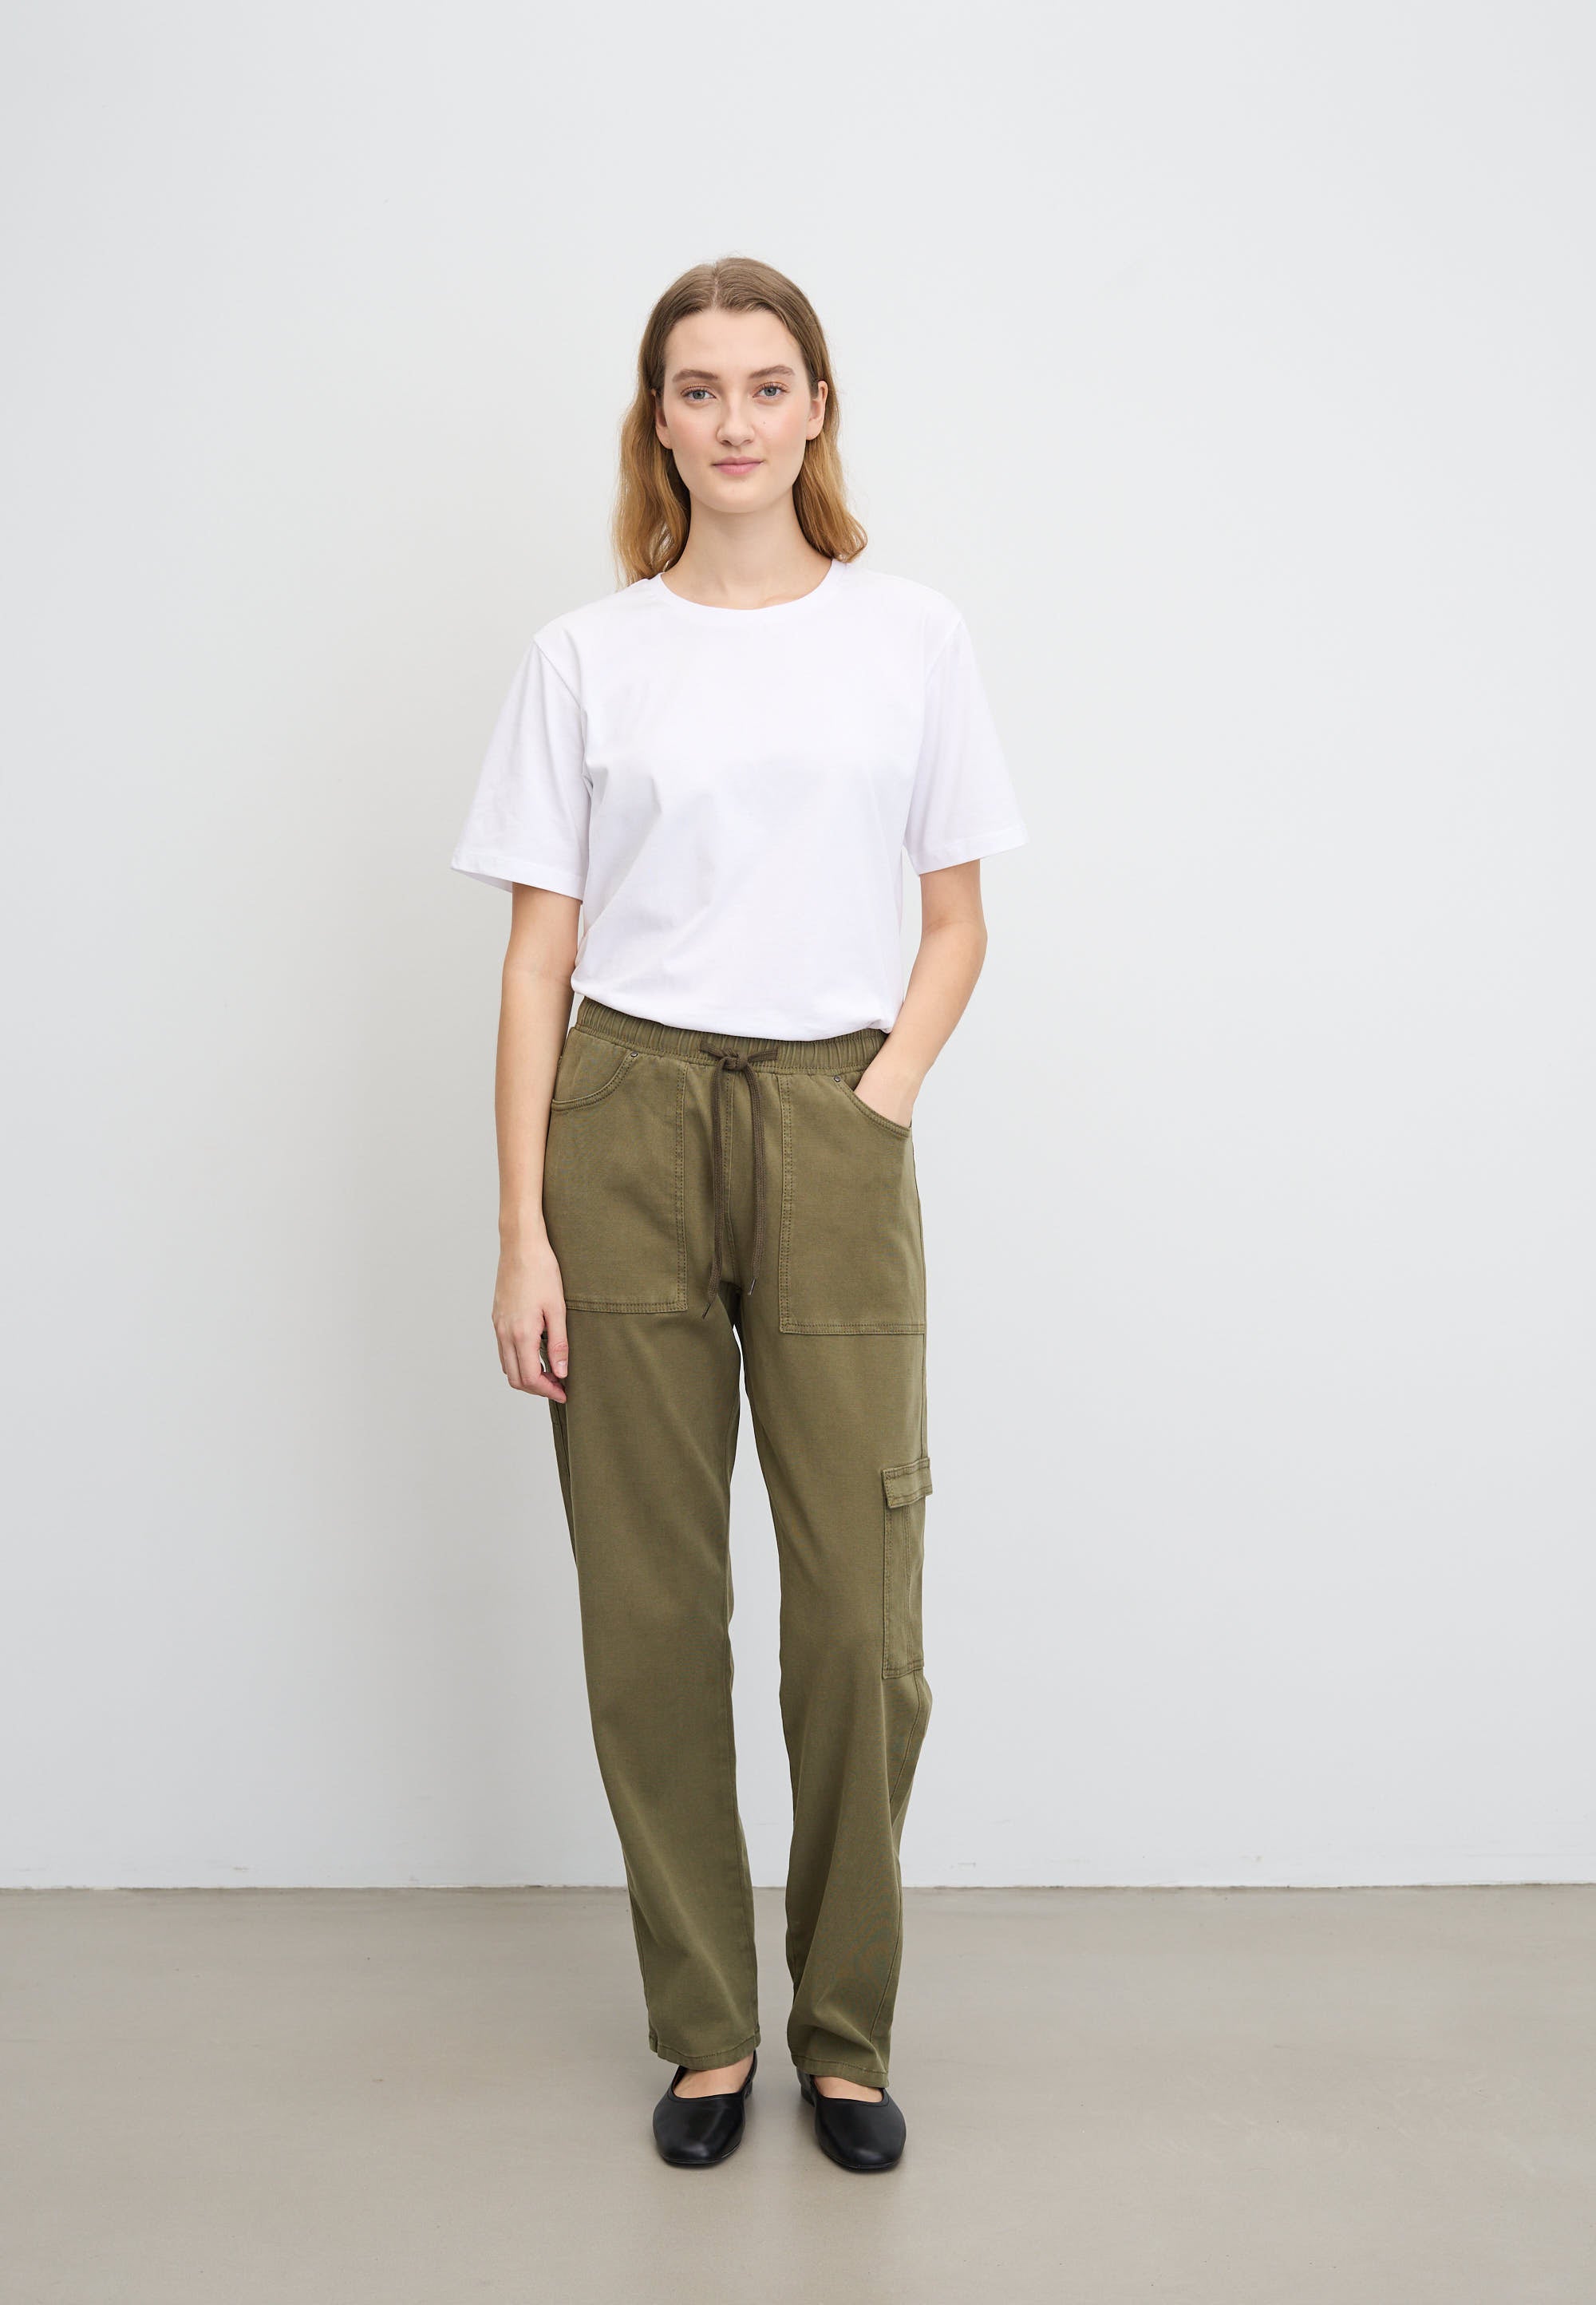 LAURIE Ofelia Cargo Relaxed - Medium Length Trousers RELAXED 55000 Dried Olive